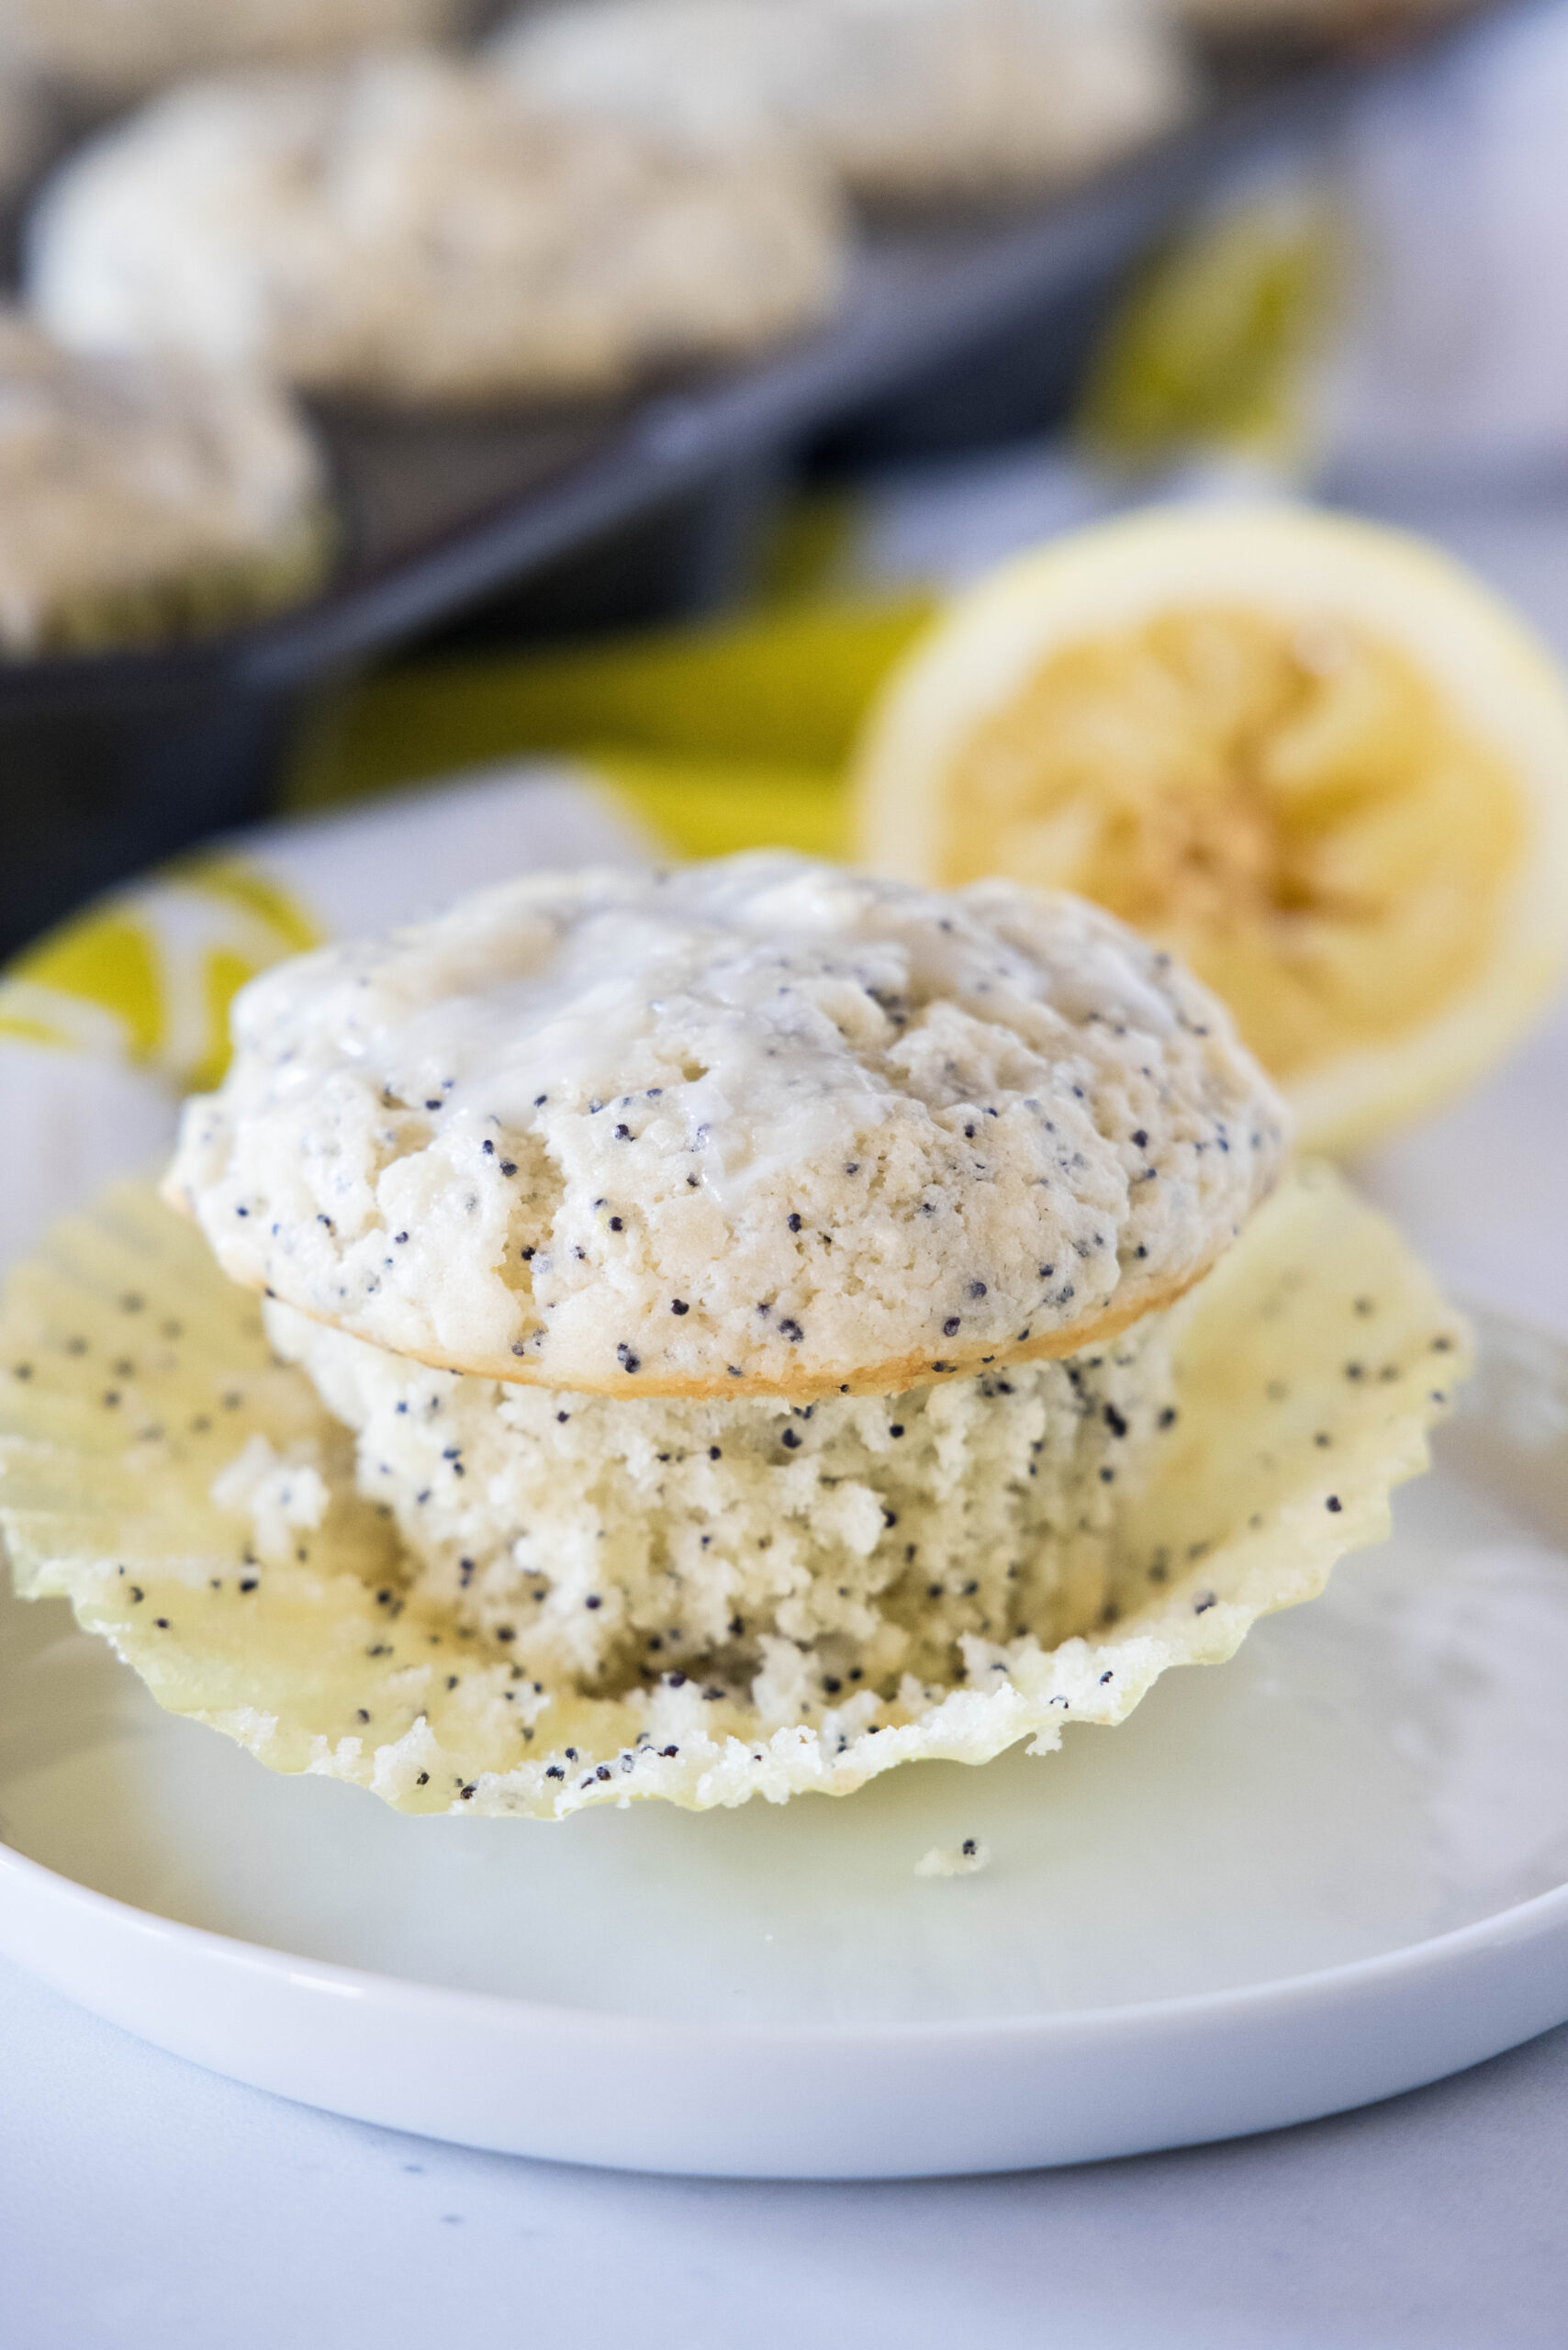 Close up of an unwrapped lemon poppy seed muffin on a white plate.